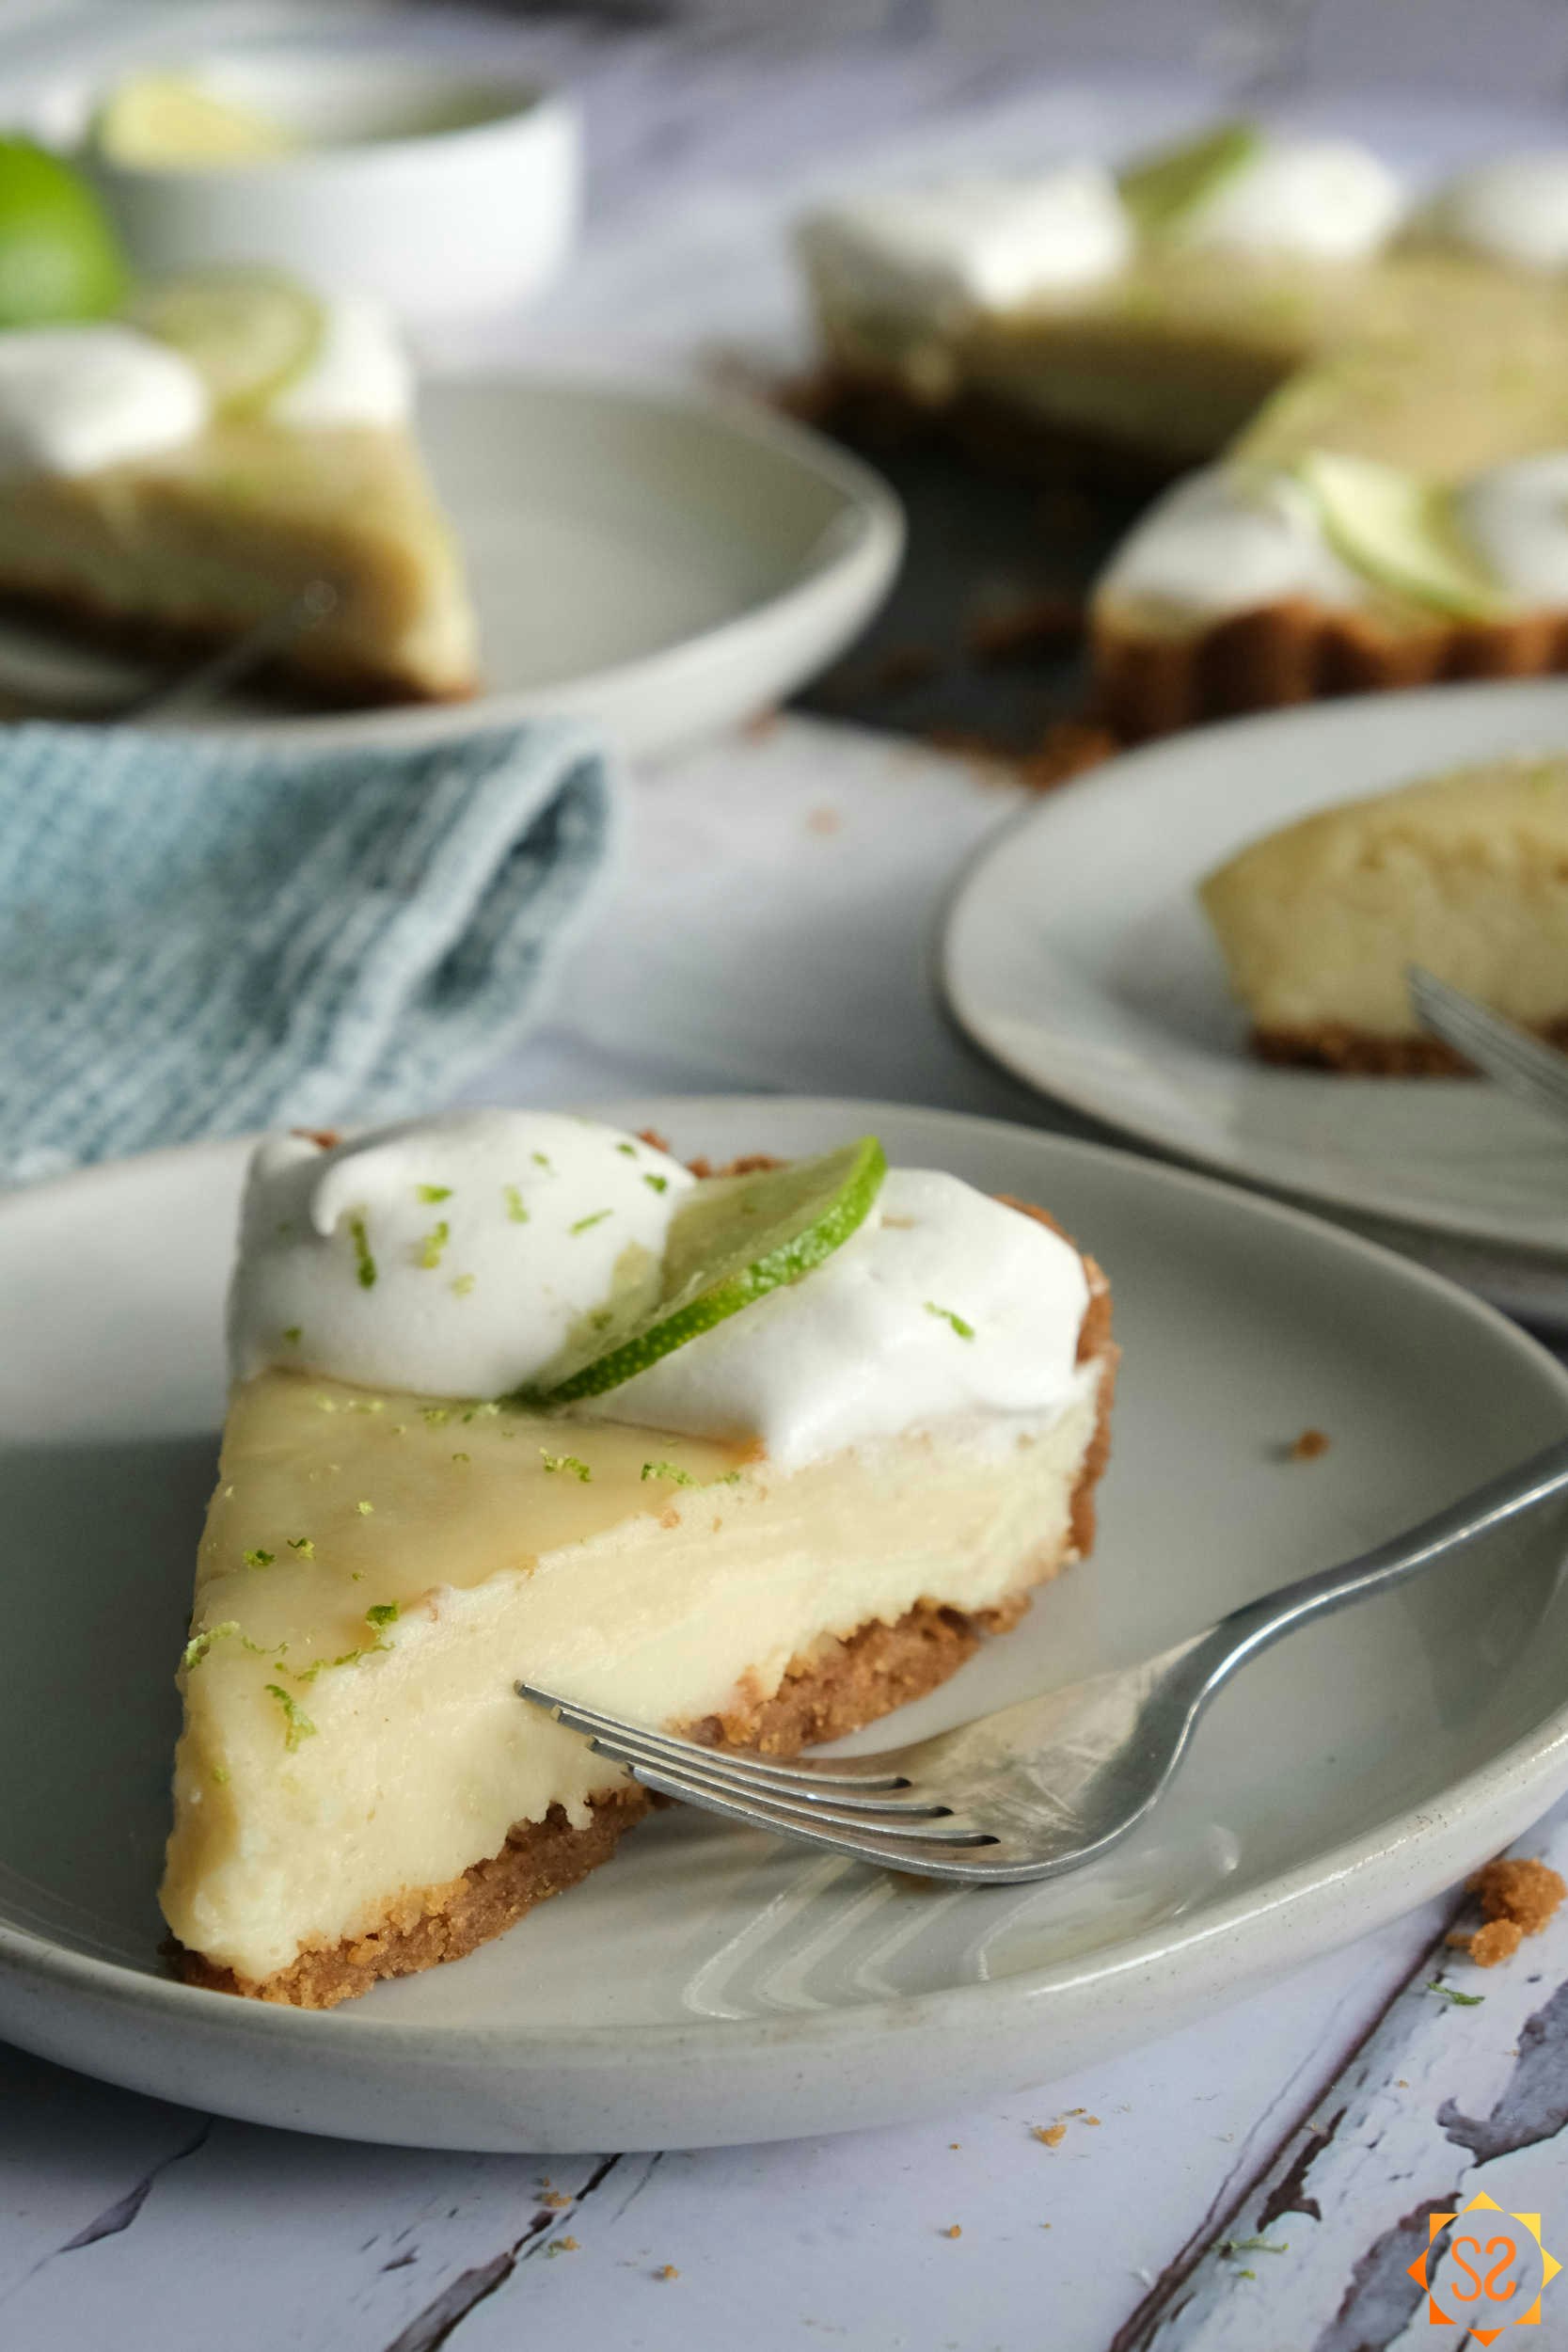 A Key lime pie slice on a plate with the whole pie and more slices in the background